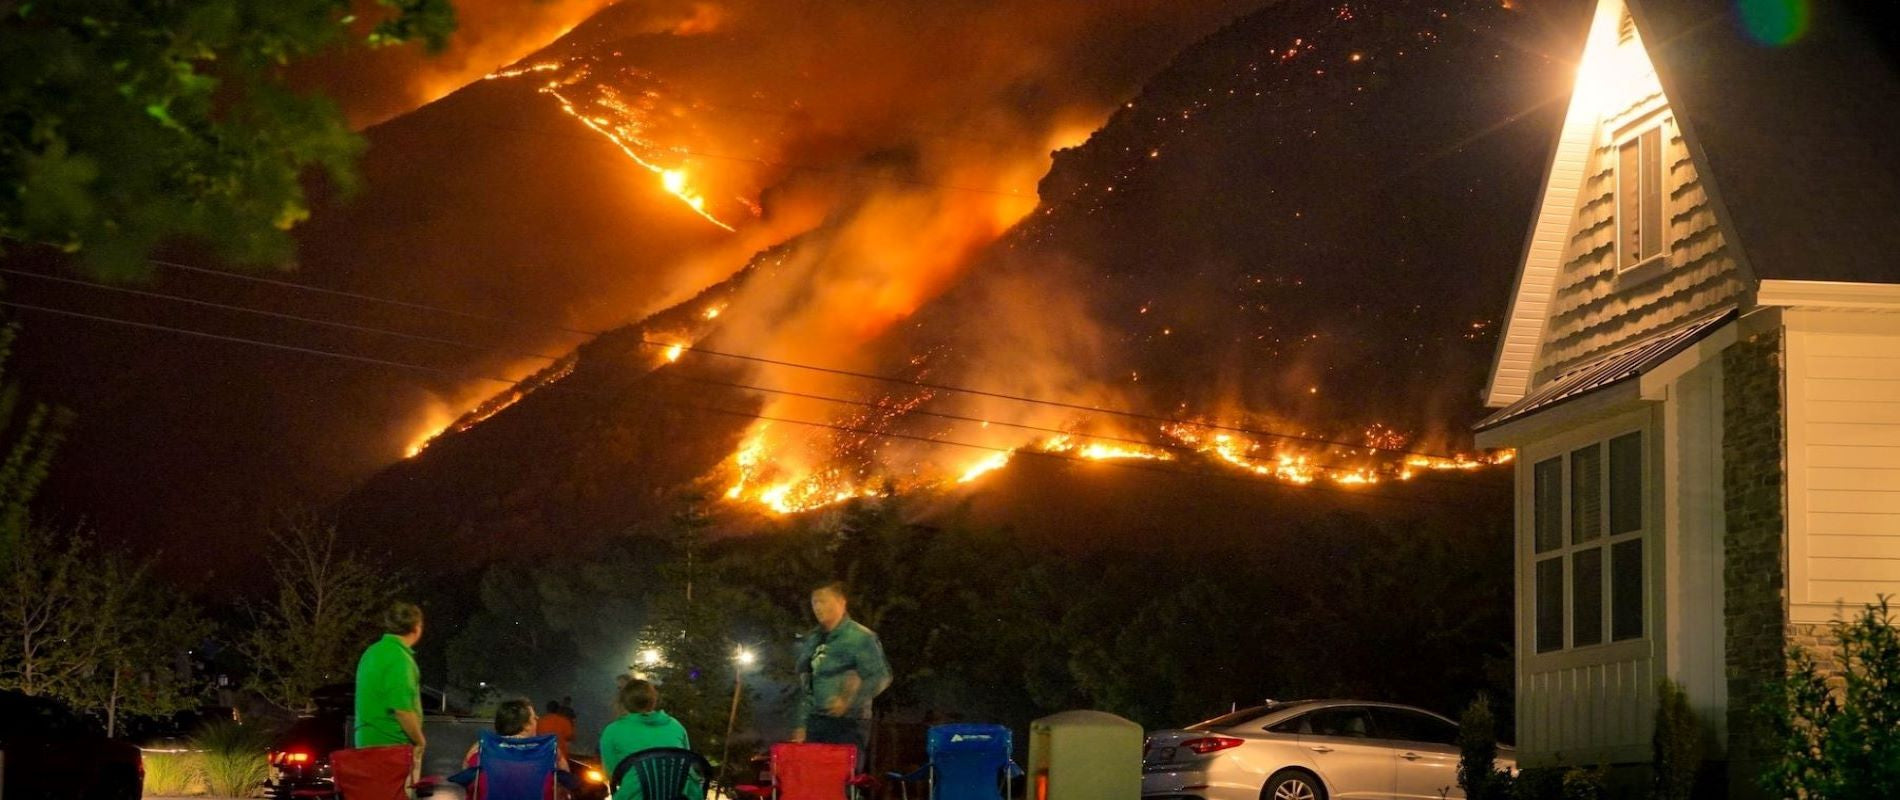 Mountainous Natural Disaster Wildfire at night approaching house, vehcles and people watching. 